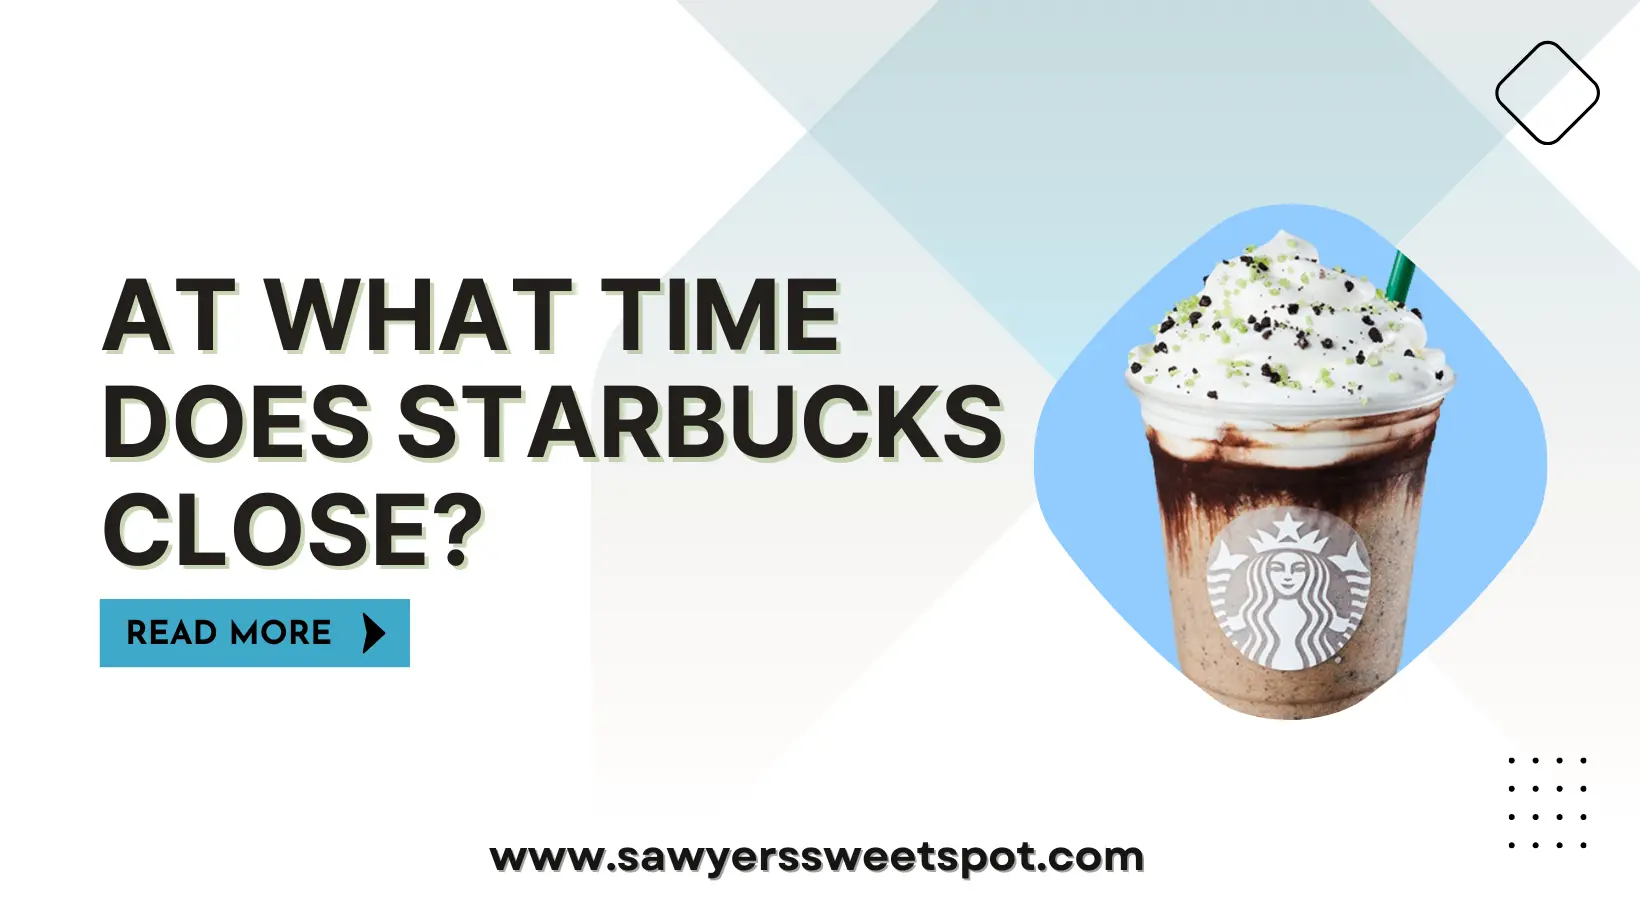 At What Time Does Starbucks Close?